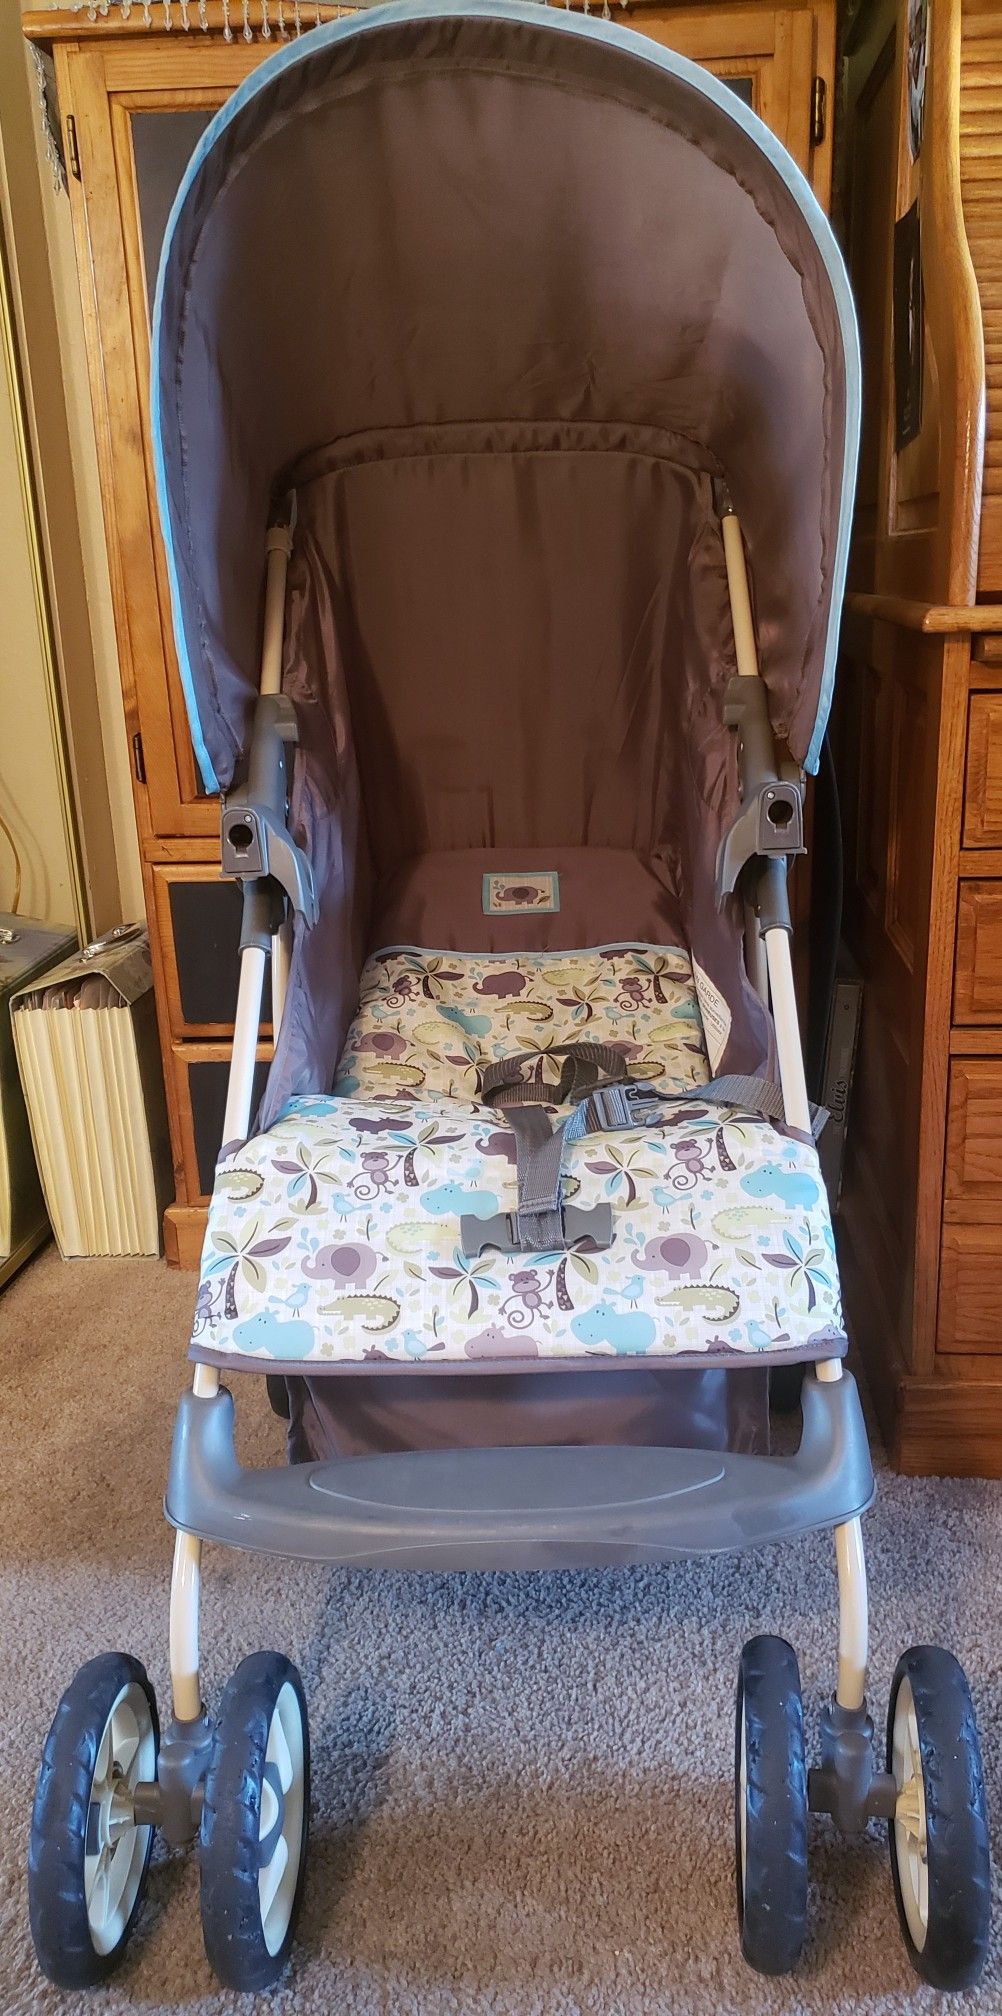 NOW FREE CANOPY BABY STROLLER